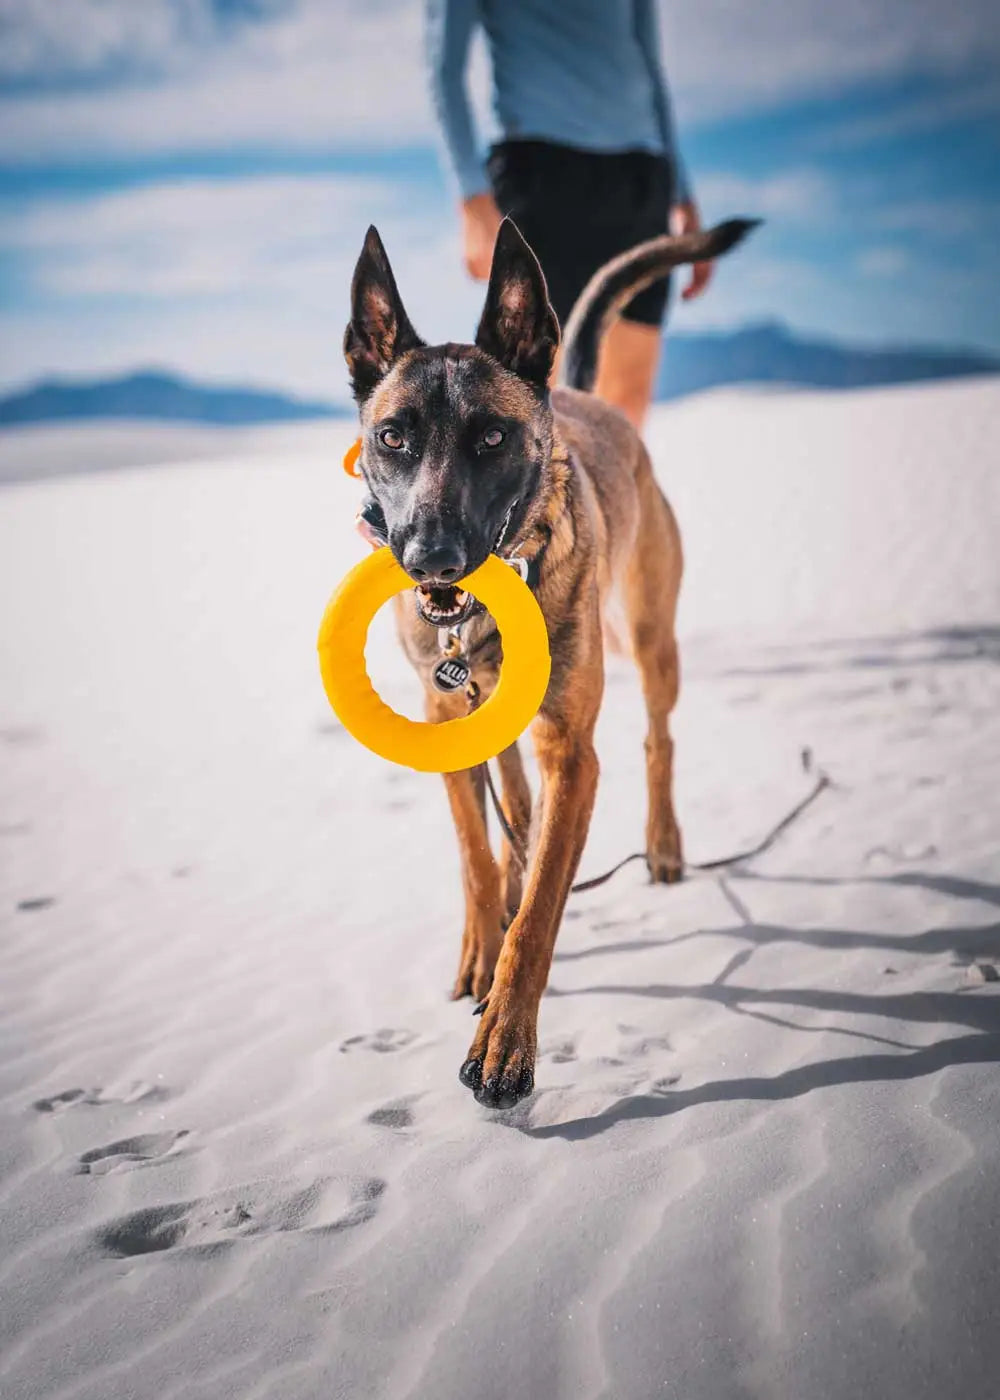 Malinois dog holding a rubber ring toy in his mouth